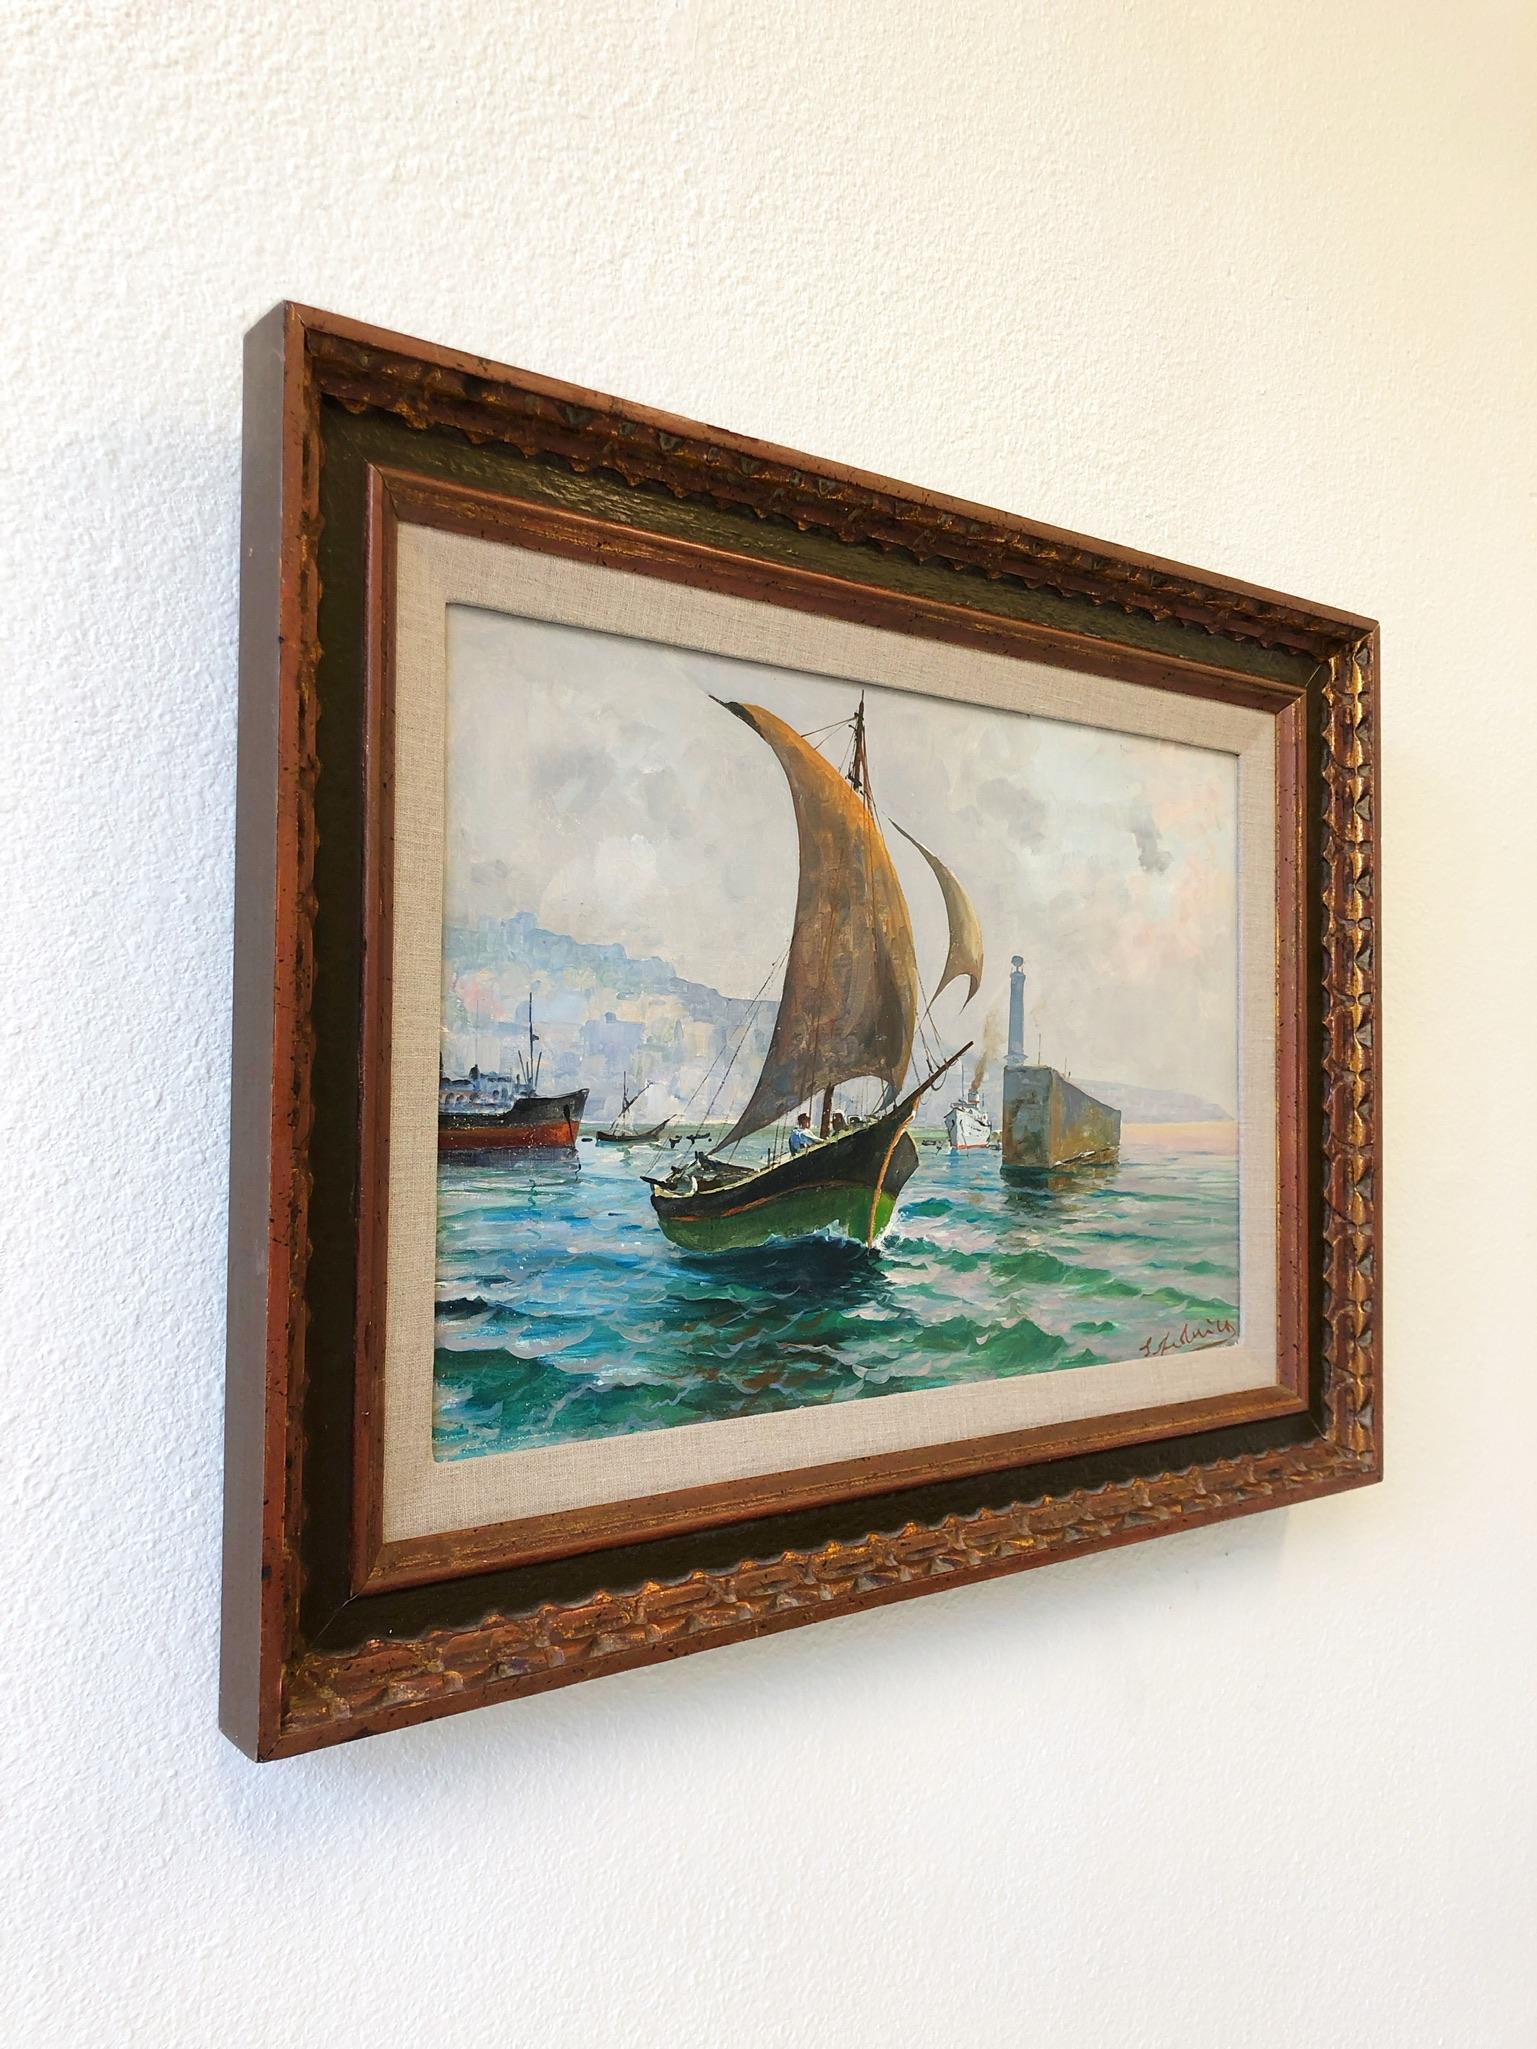 Original oil on canvas painting by listed Italian artists Federico Salvatore. 
The painting depicts a sailboat coming out of the Marina Grande in Capri Italy. 
Hand marked ‘Marina Grande’ Capri 1965 on the back and signed S Federico on the front.